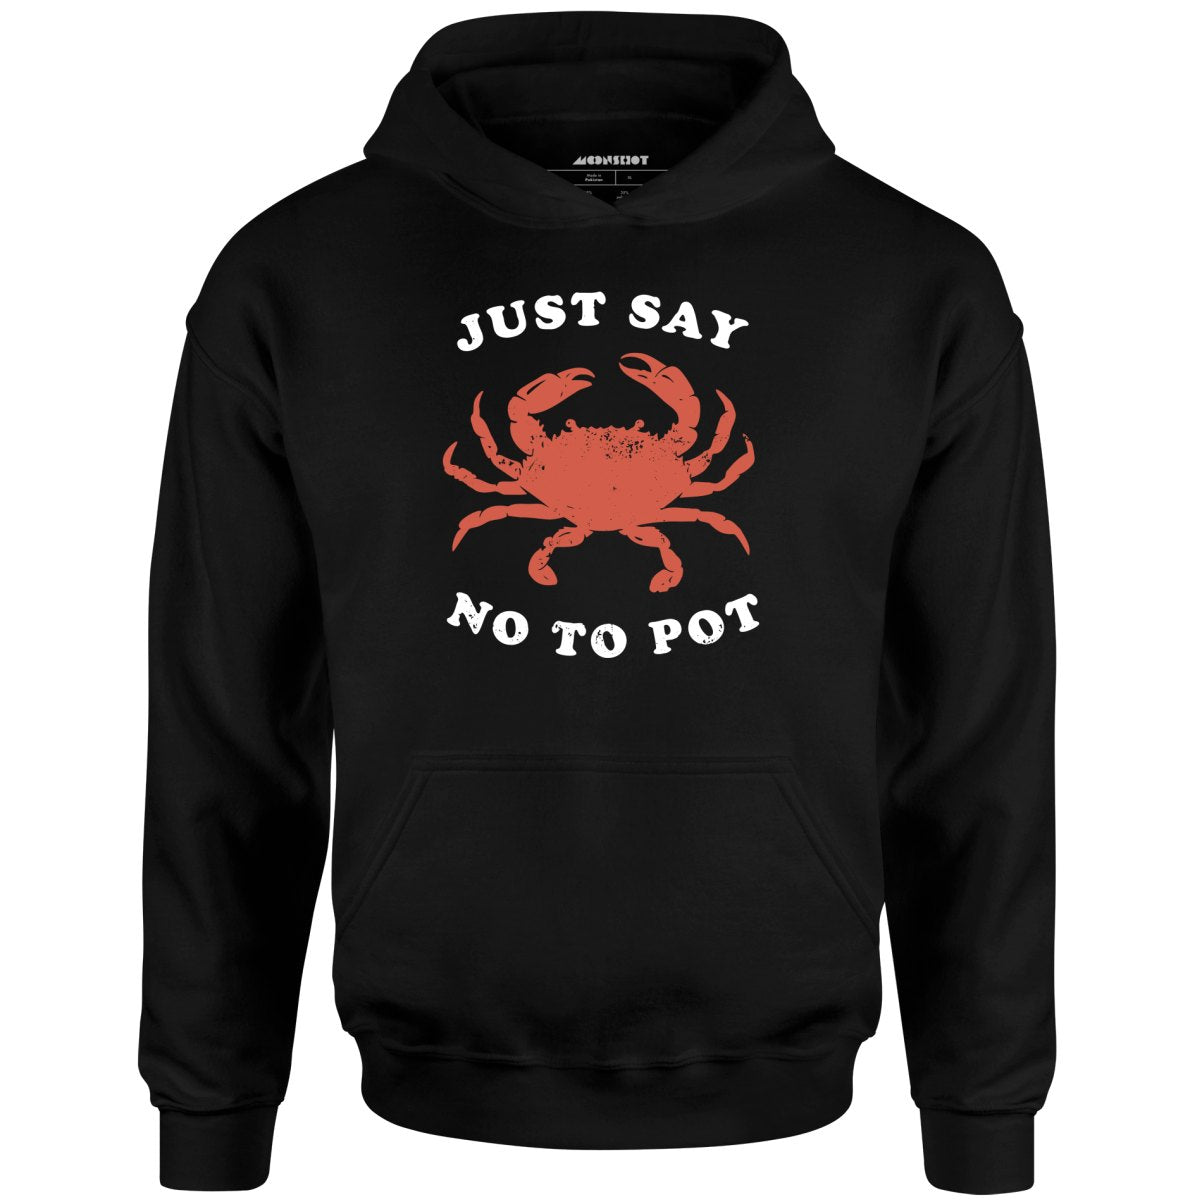 Just Say No To Pot - Unisex Hoodie